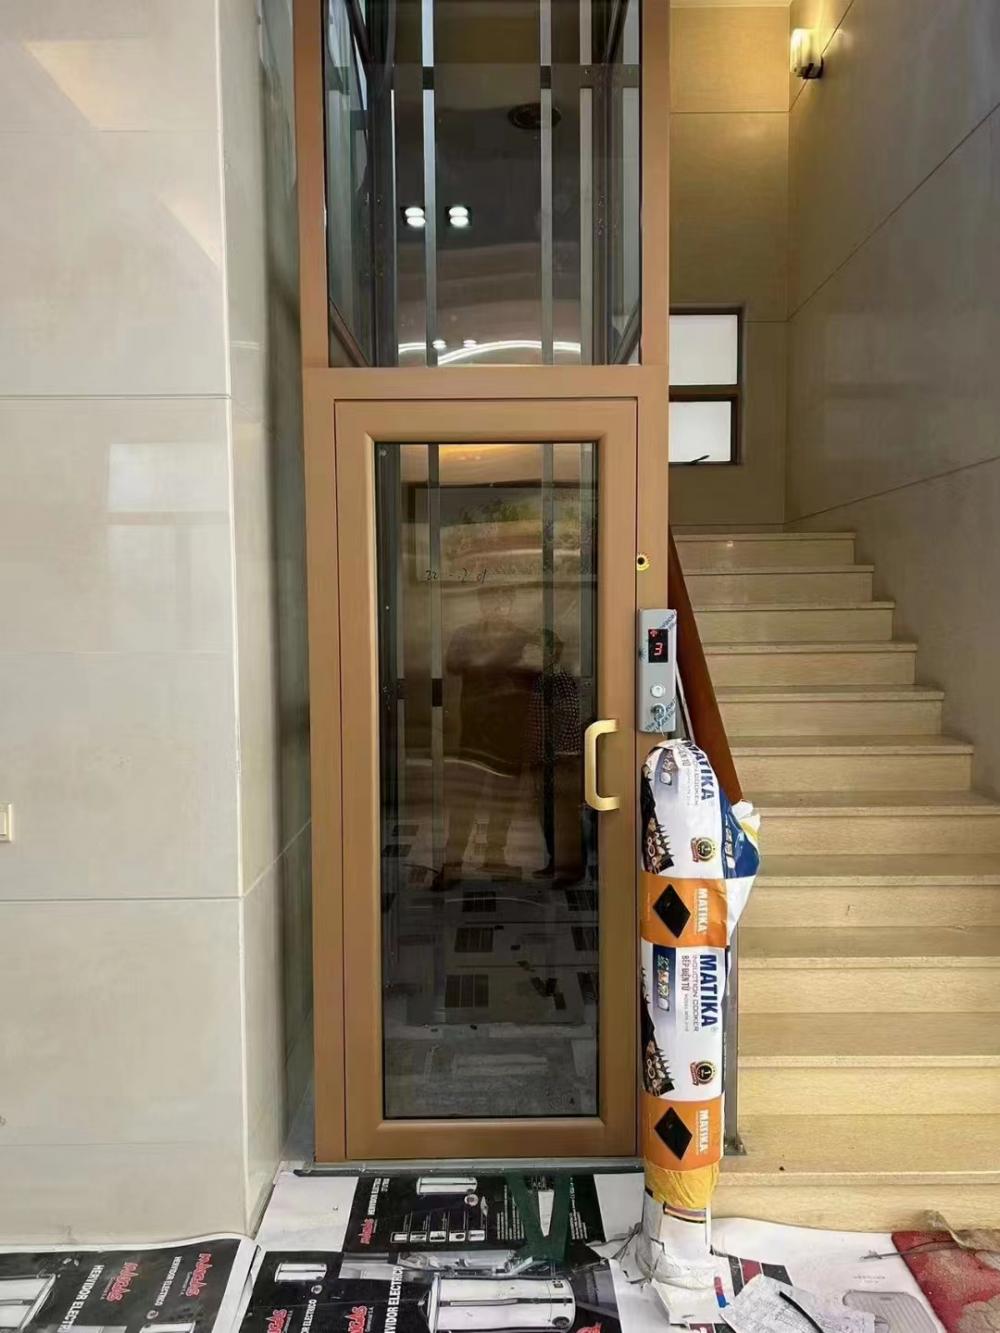 Comfortable Home Residential Elevator